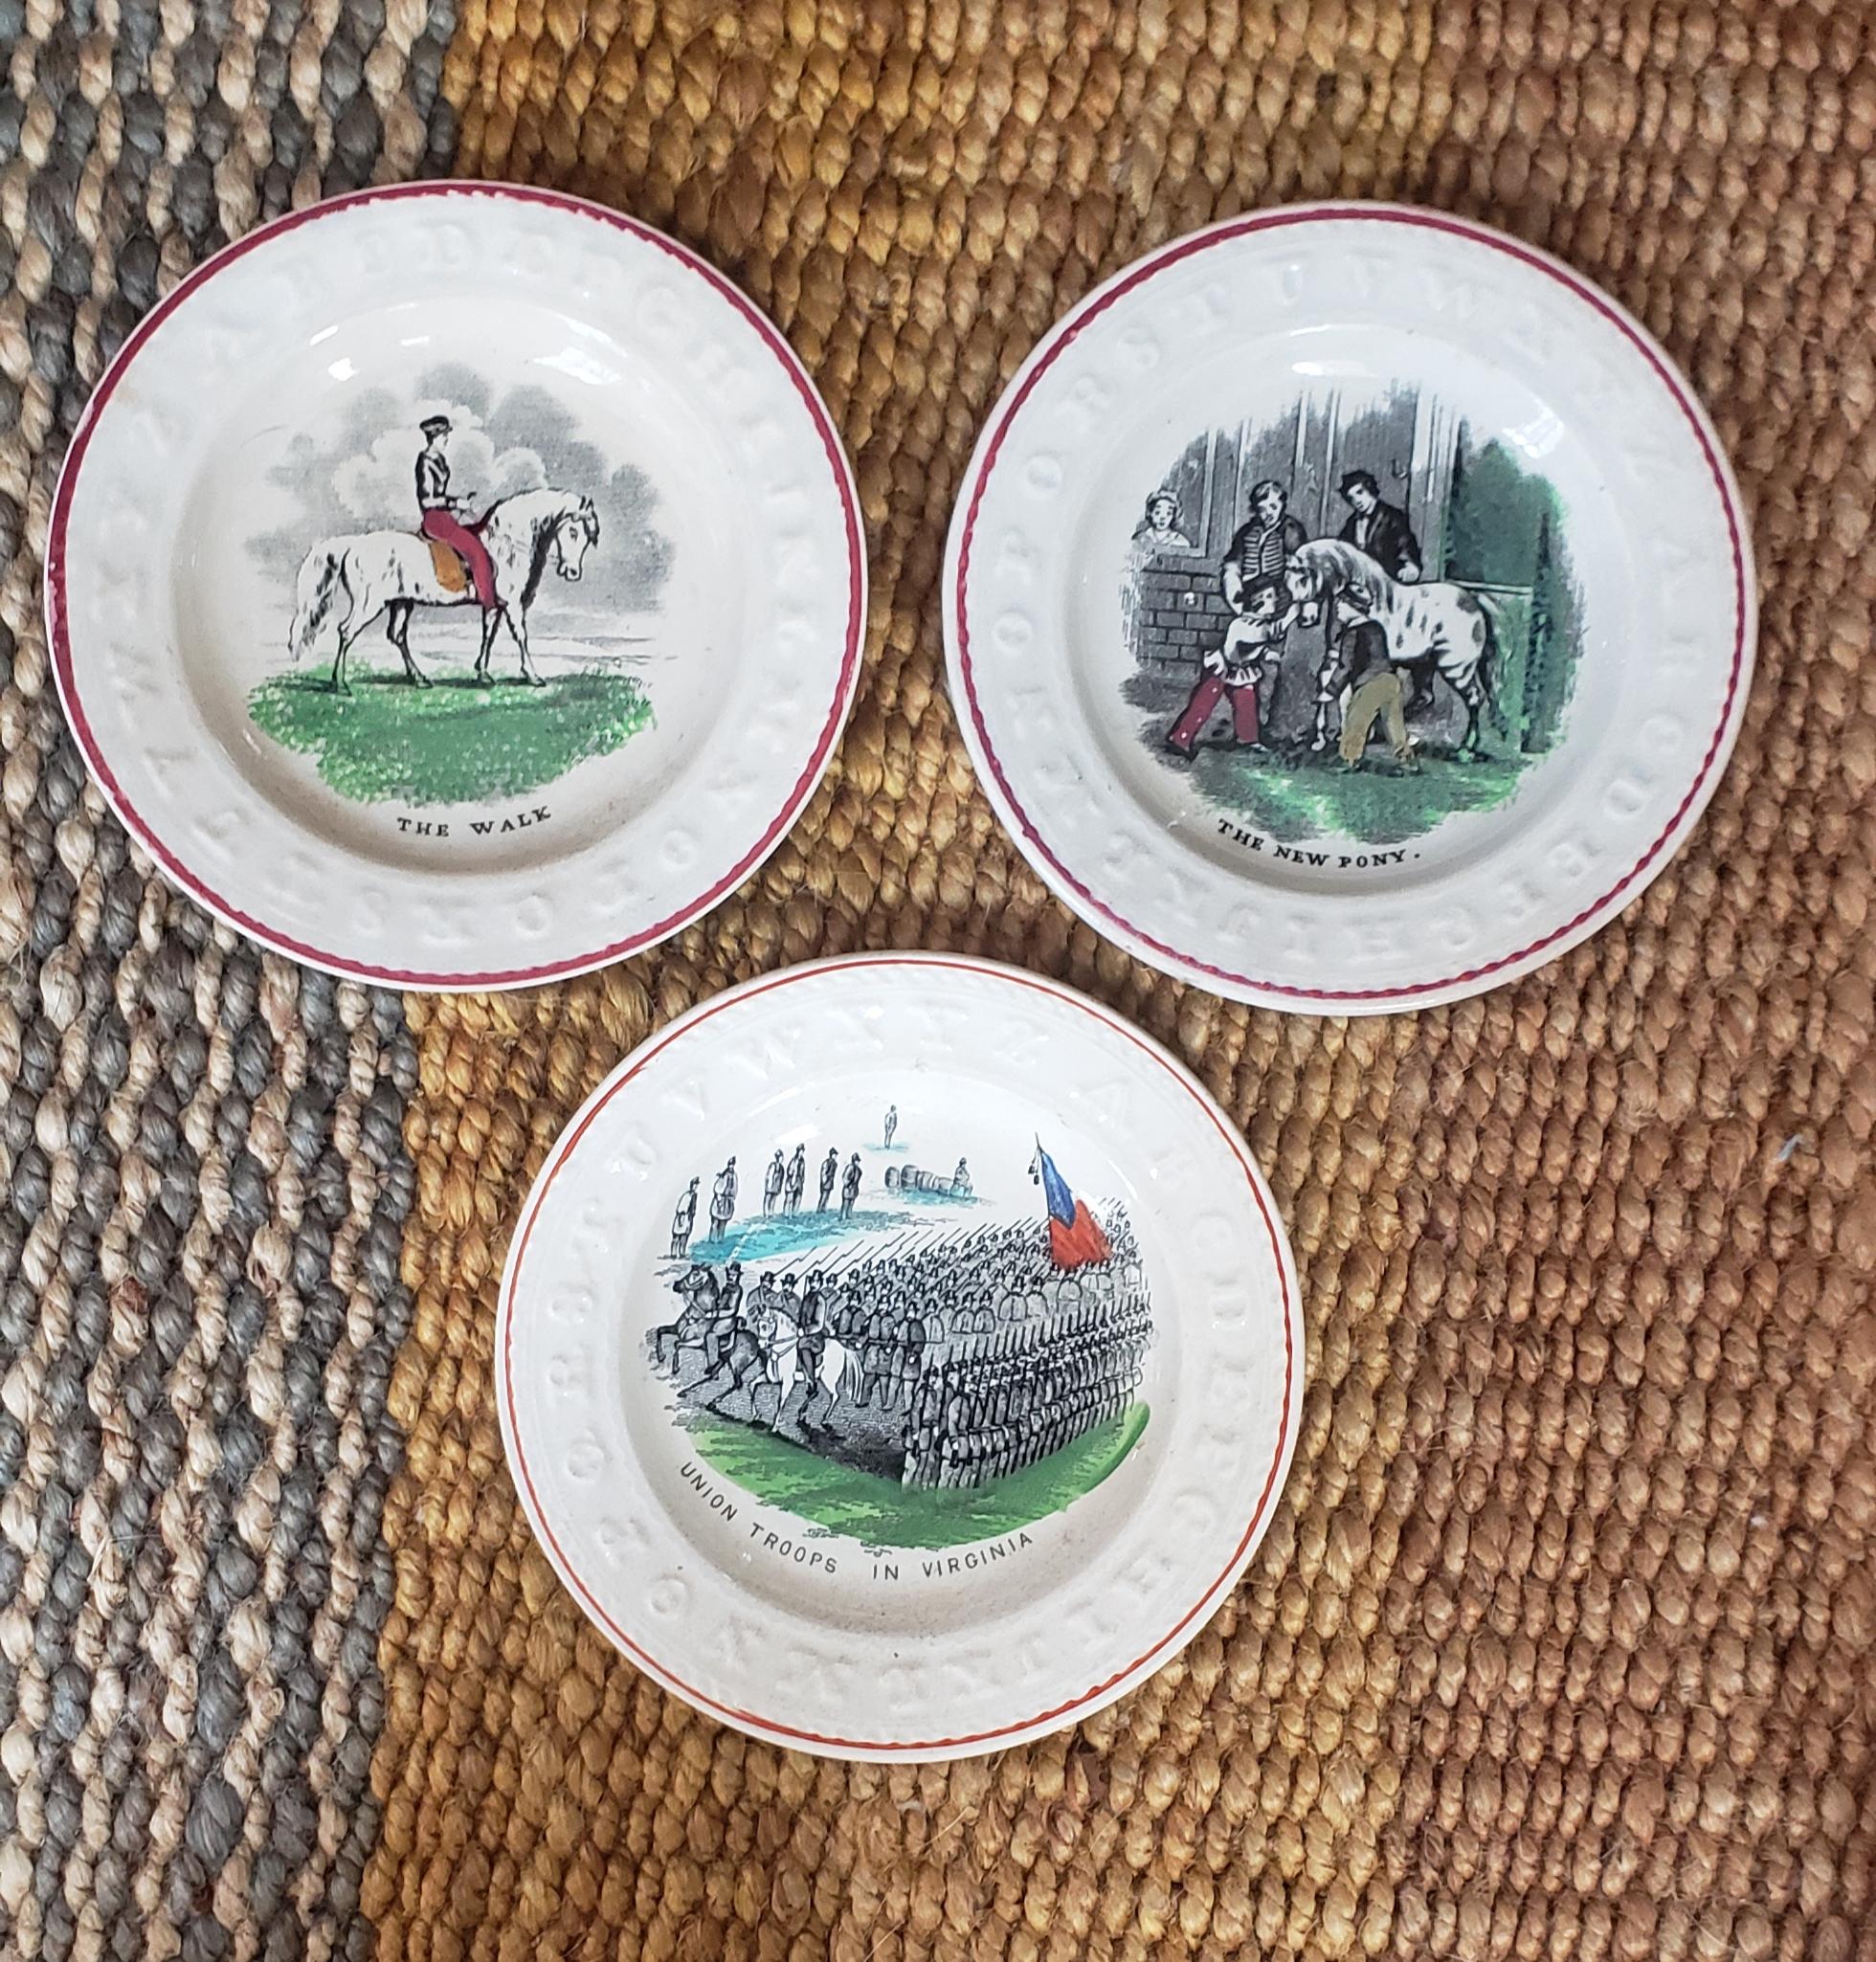 This is a glorious set of three child transferware alphabet or ABC plates dating from the early to mid-19th century. The plates measures just 5-1/8 inches in diameter with the letters of the alphabet press moulded around the rim and surrounded by a